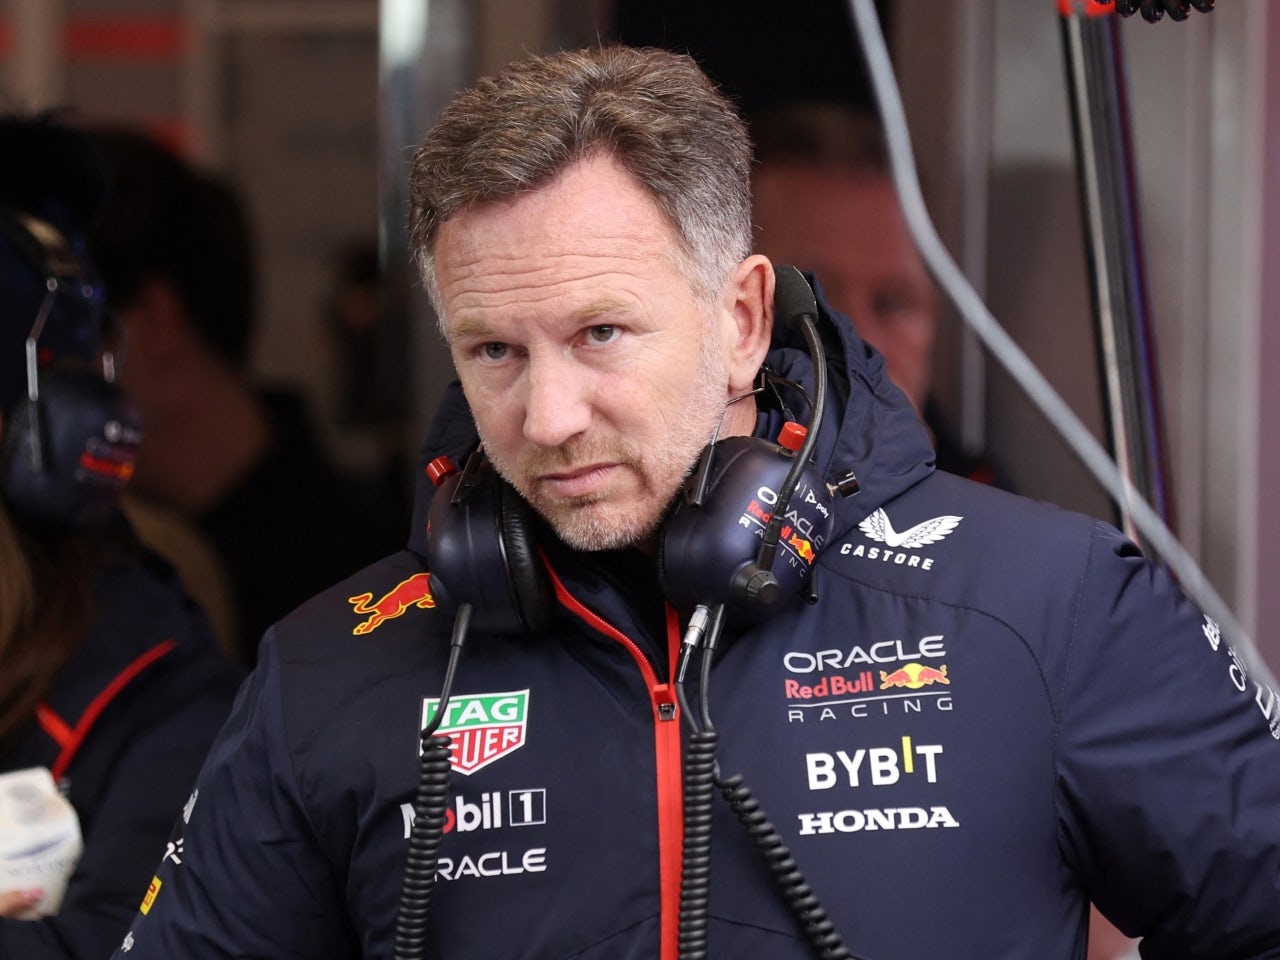 Horner scandal outcome expected early this week